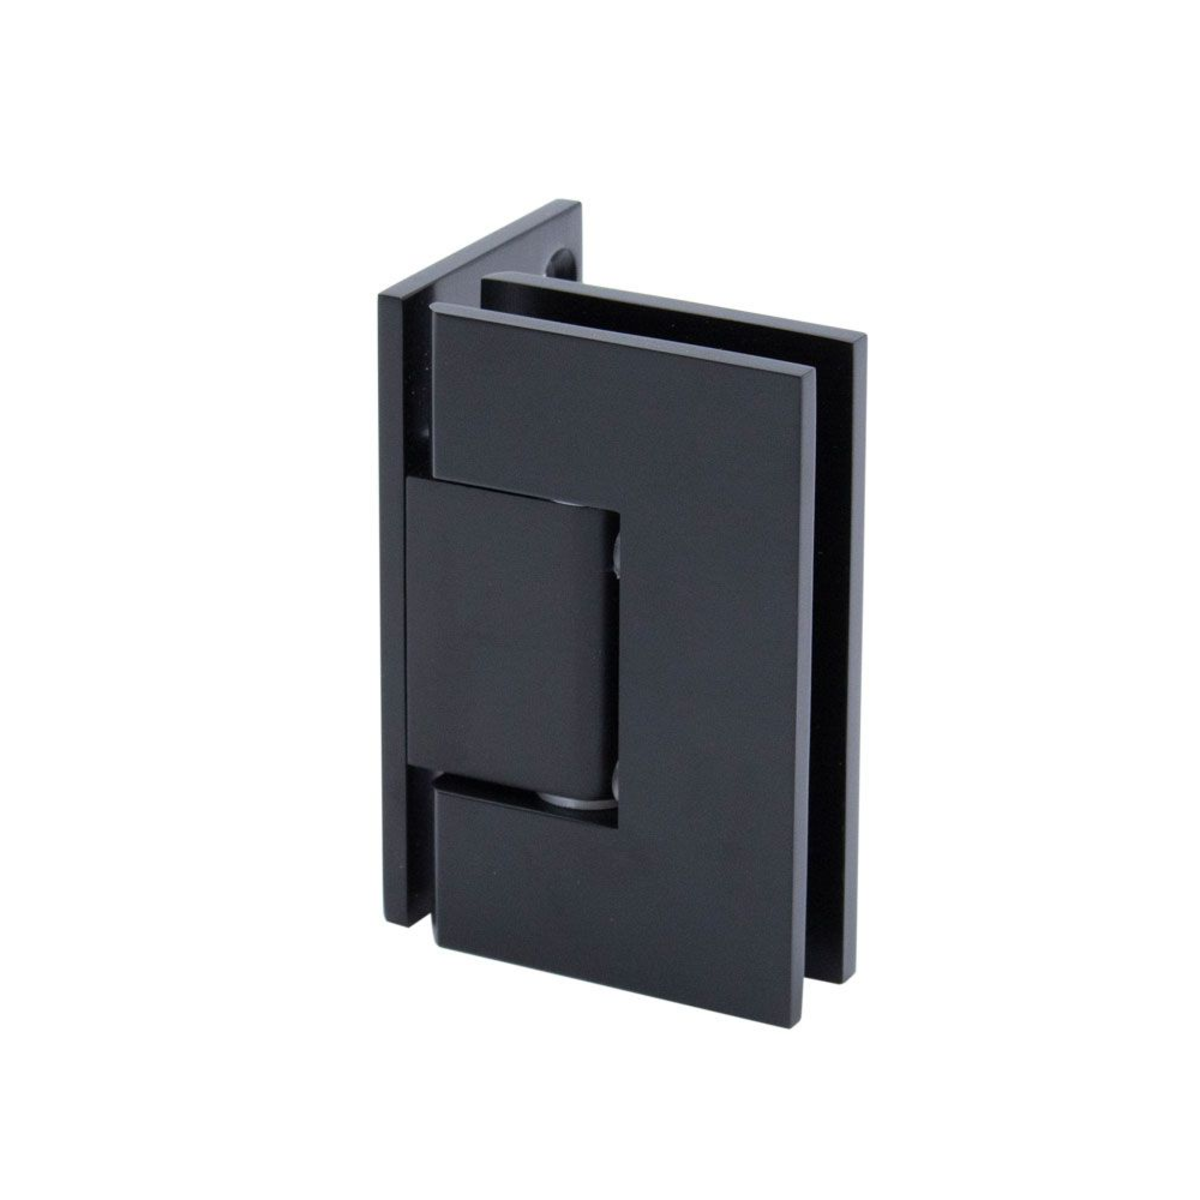 Wall to Glass Offset Back Plate Hinge